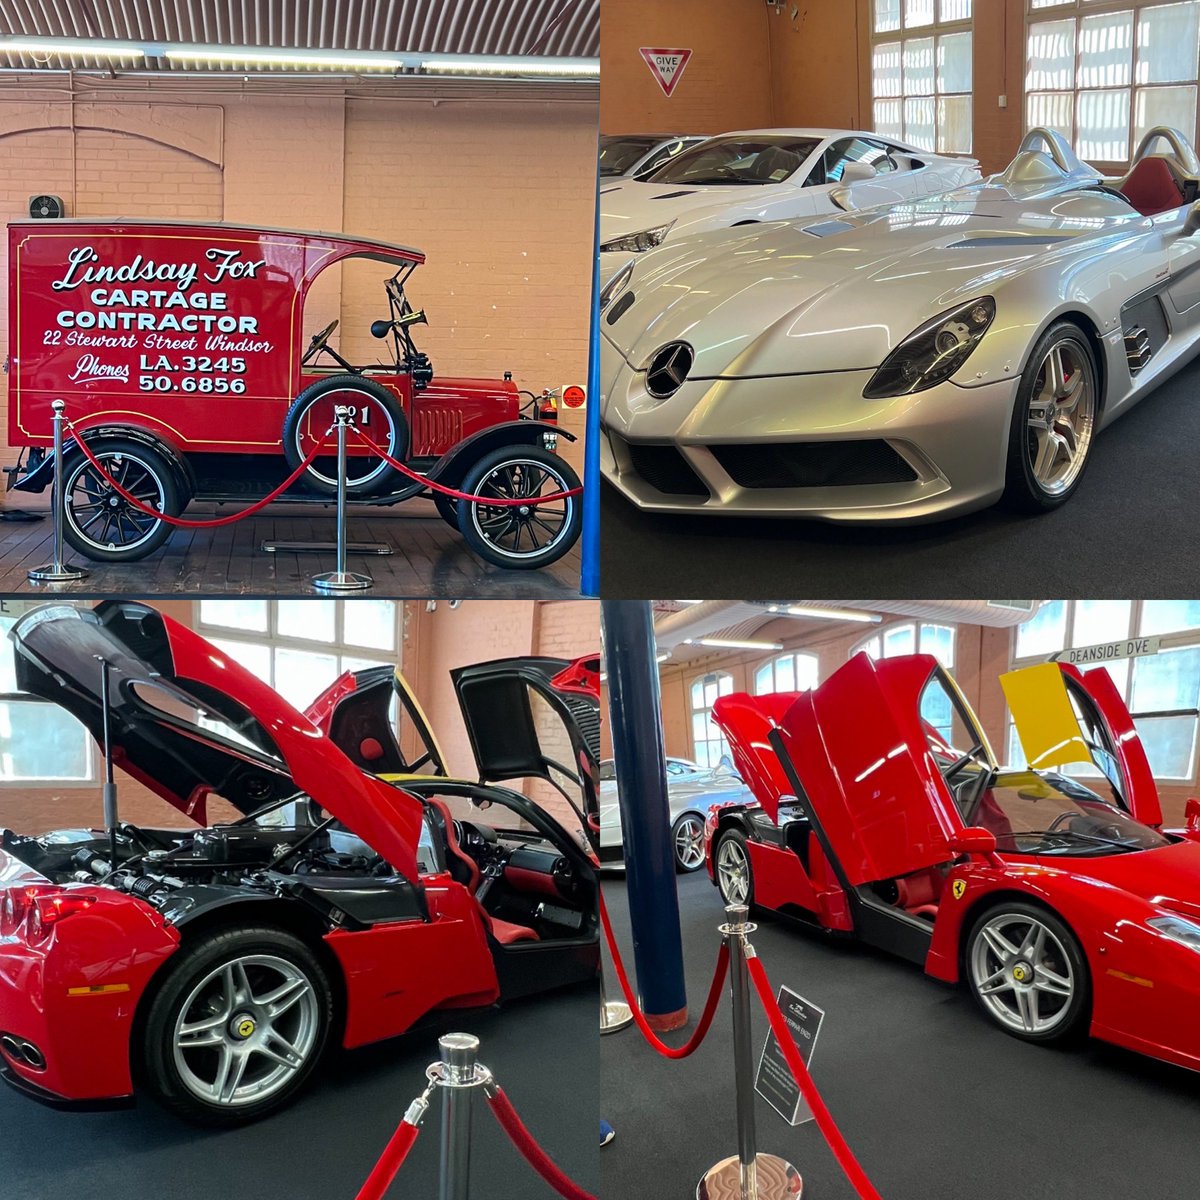 This is why I love my job 💙
Over 4 hrs with one of my clients. Travelling to and from Docklands, for the Fox Collection Classic car museum #Respite #RewardingJob